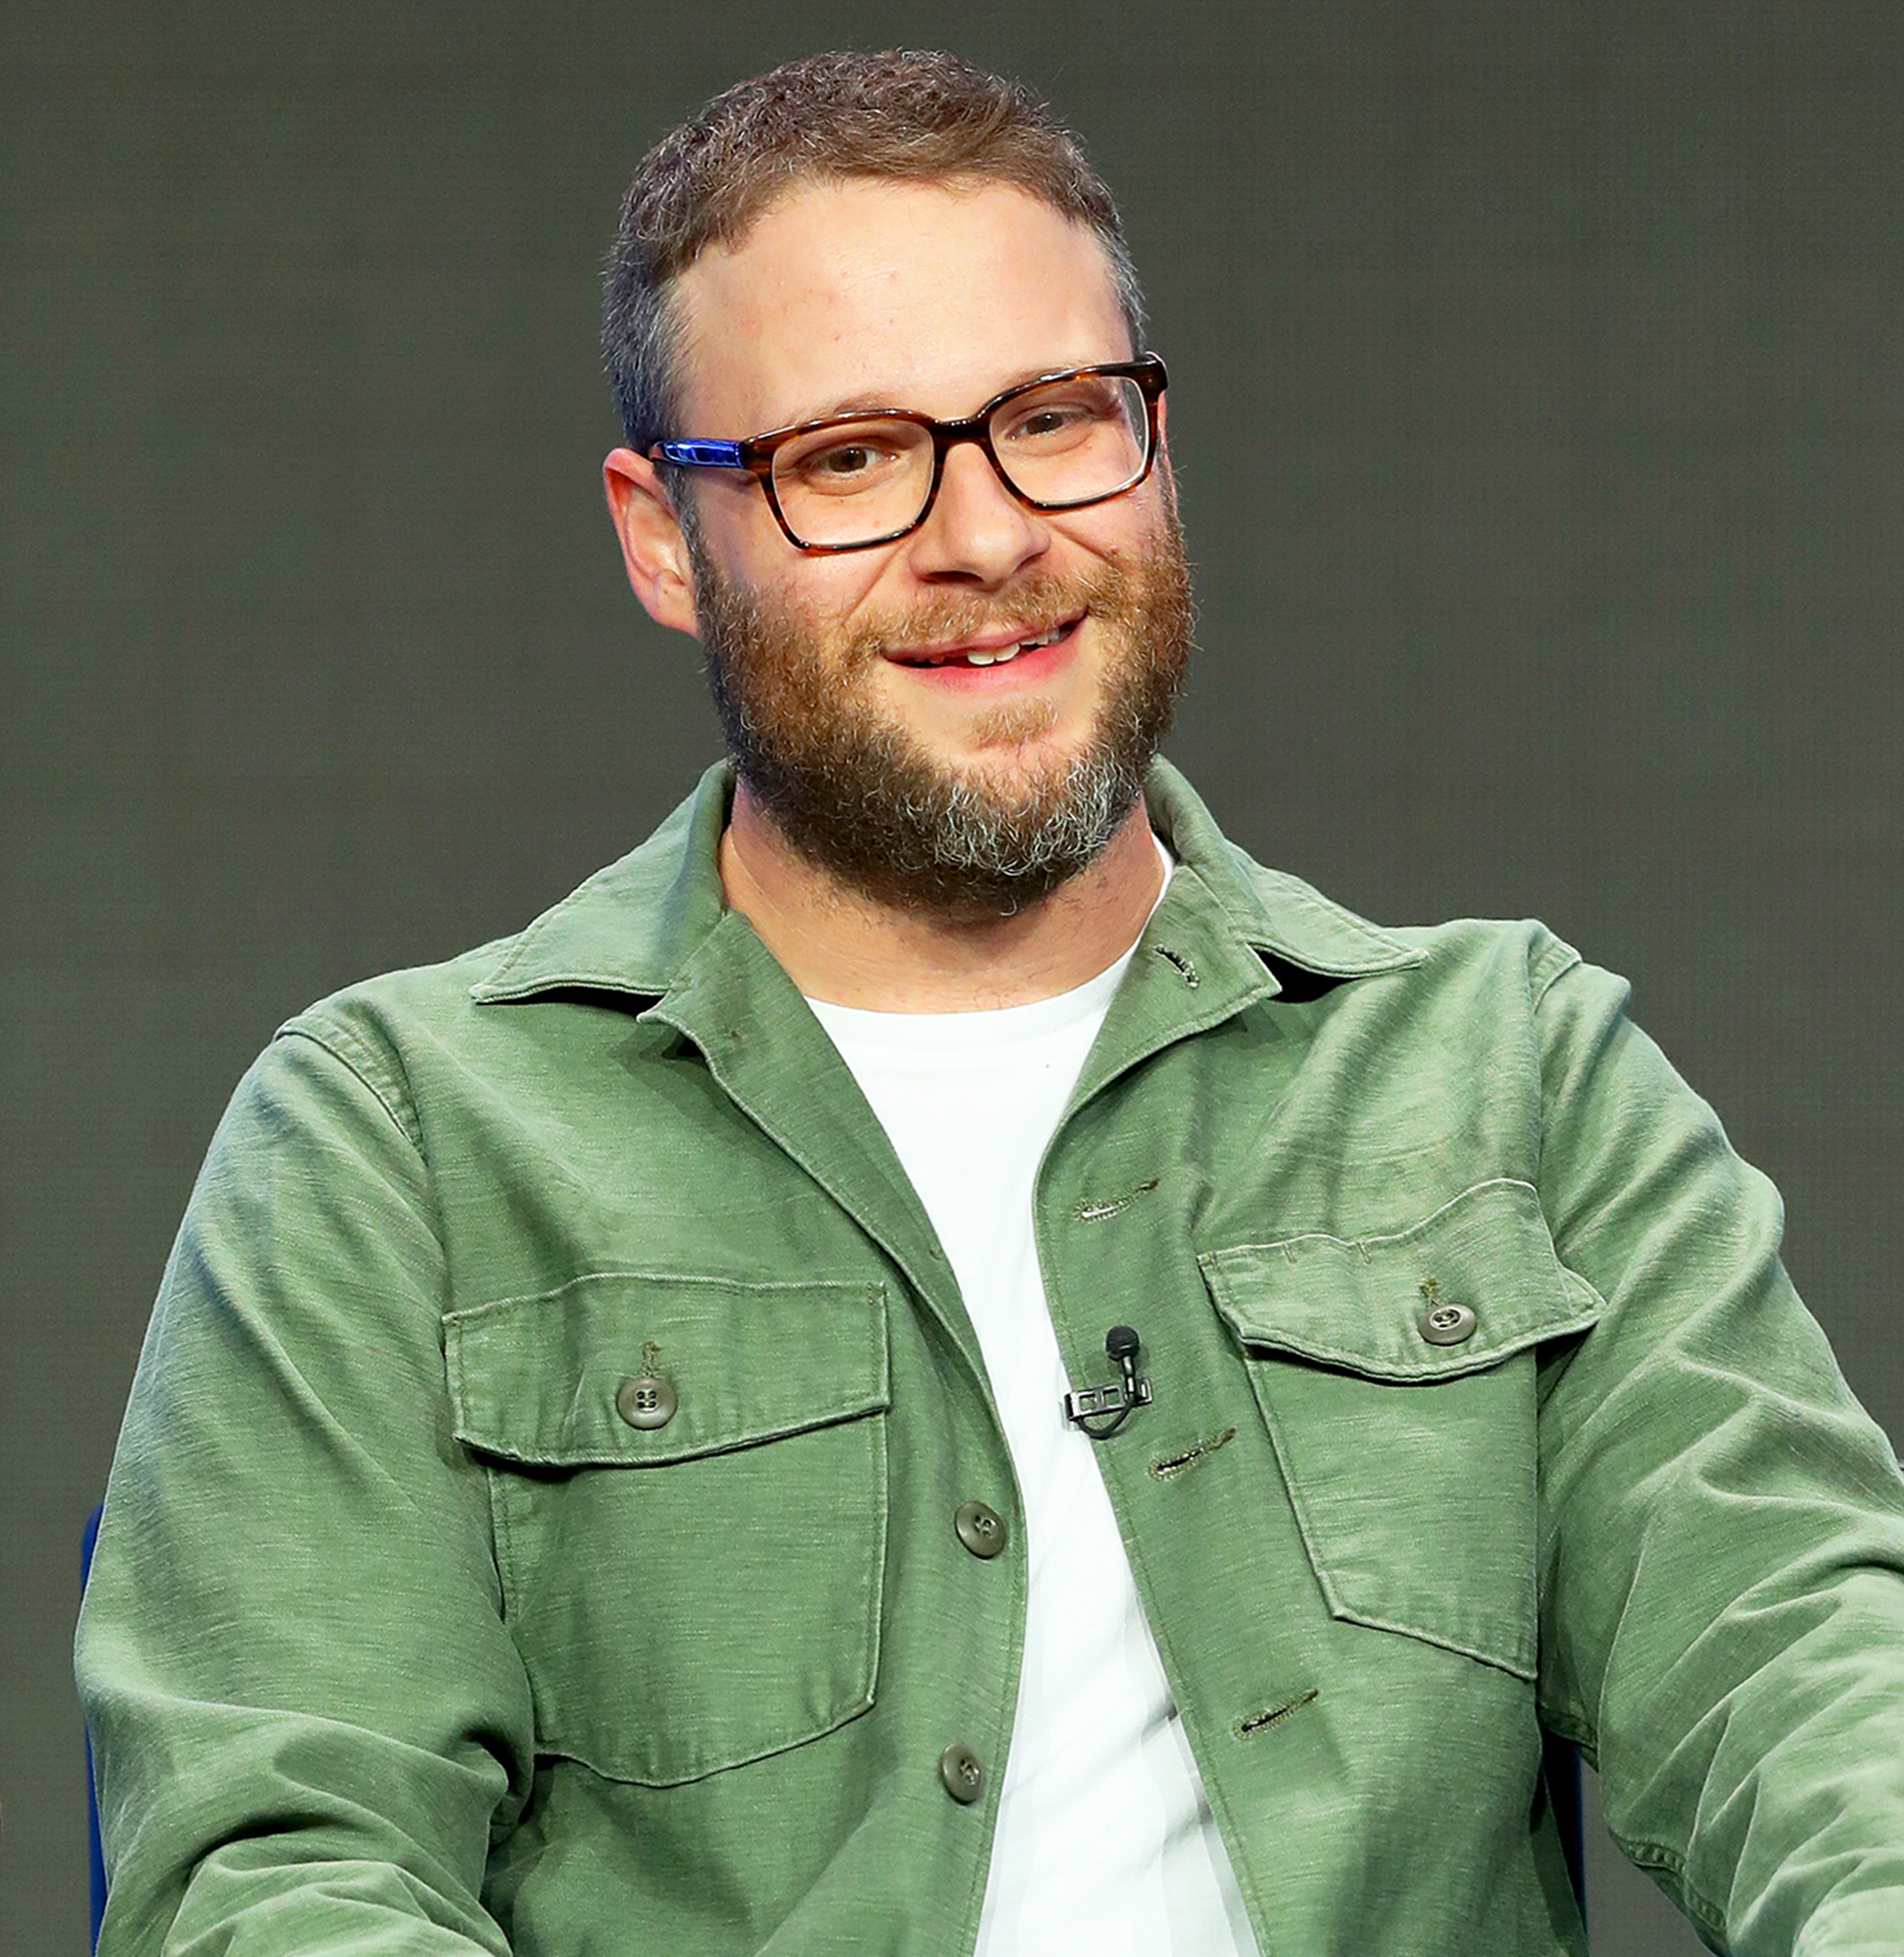 Seth Rogen's Mom Used Twitter to Find Him